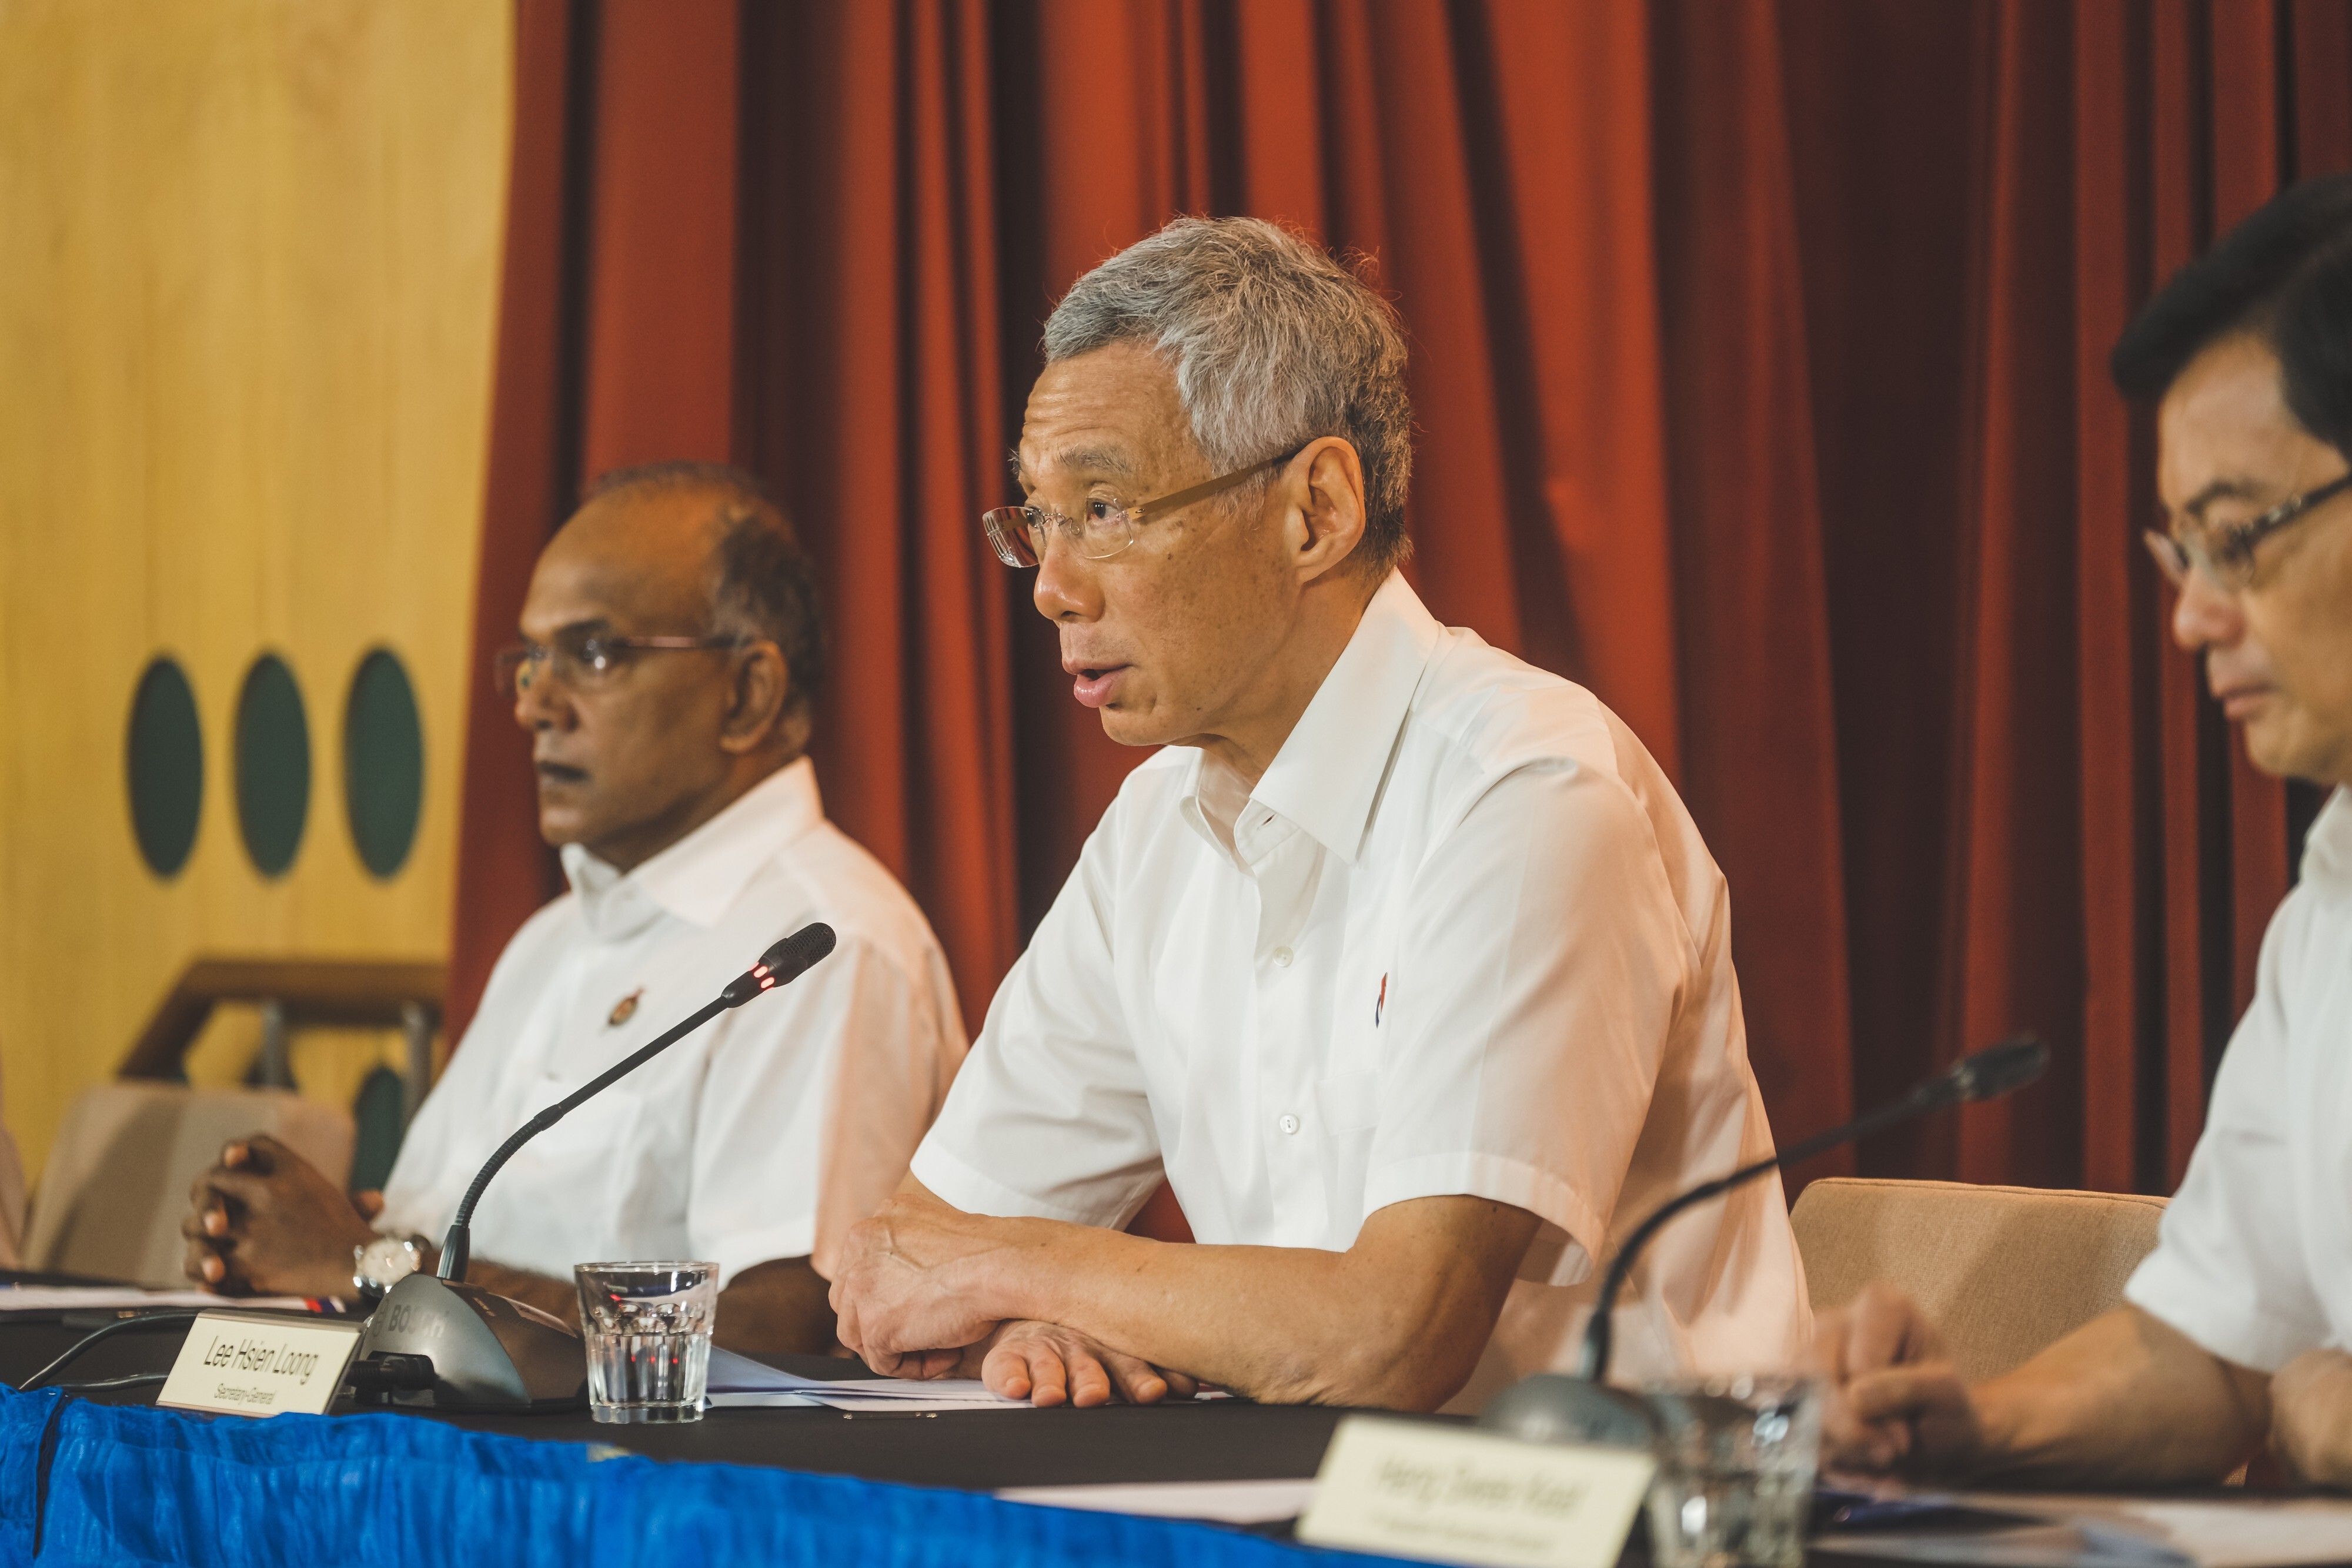 Leader of PAP and Singapore Prime Minister Lee Hsien Loong at a post-election press conference on July 11, 2020. Photo: Handout